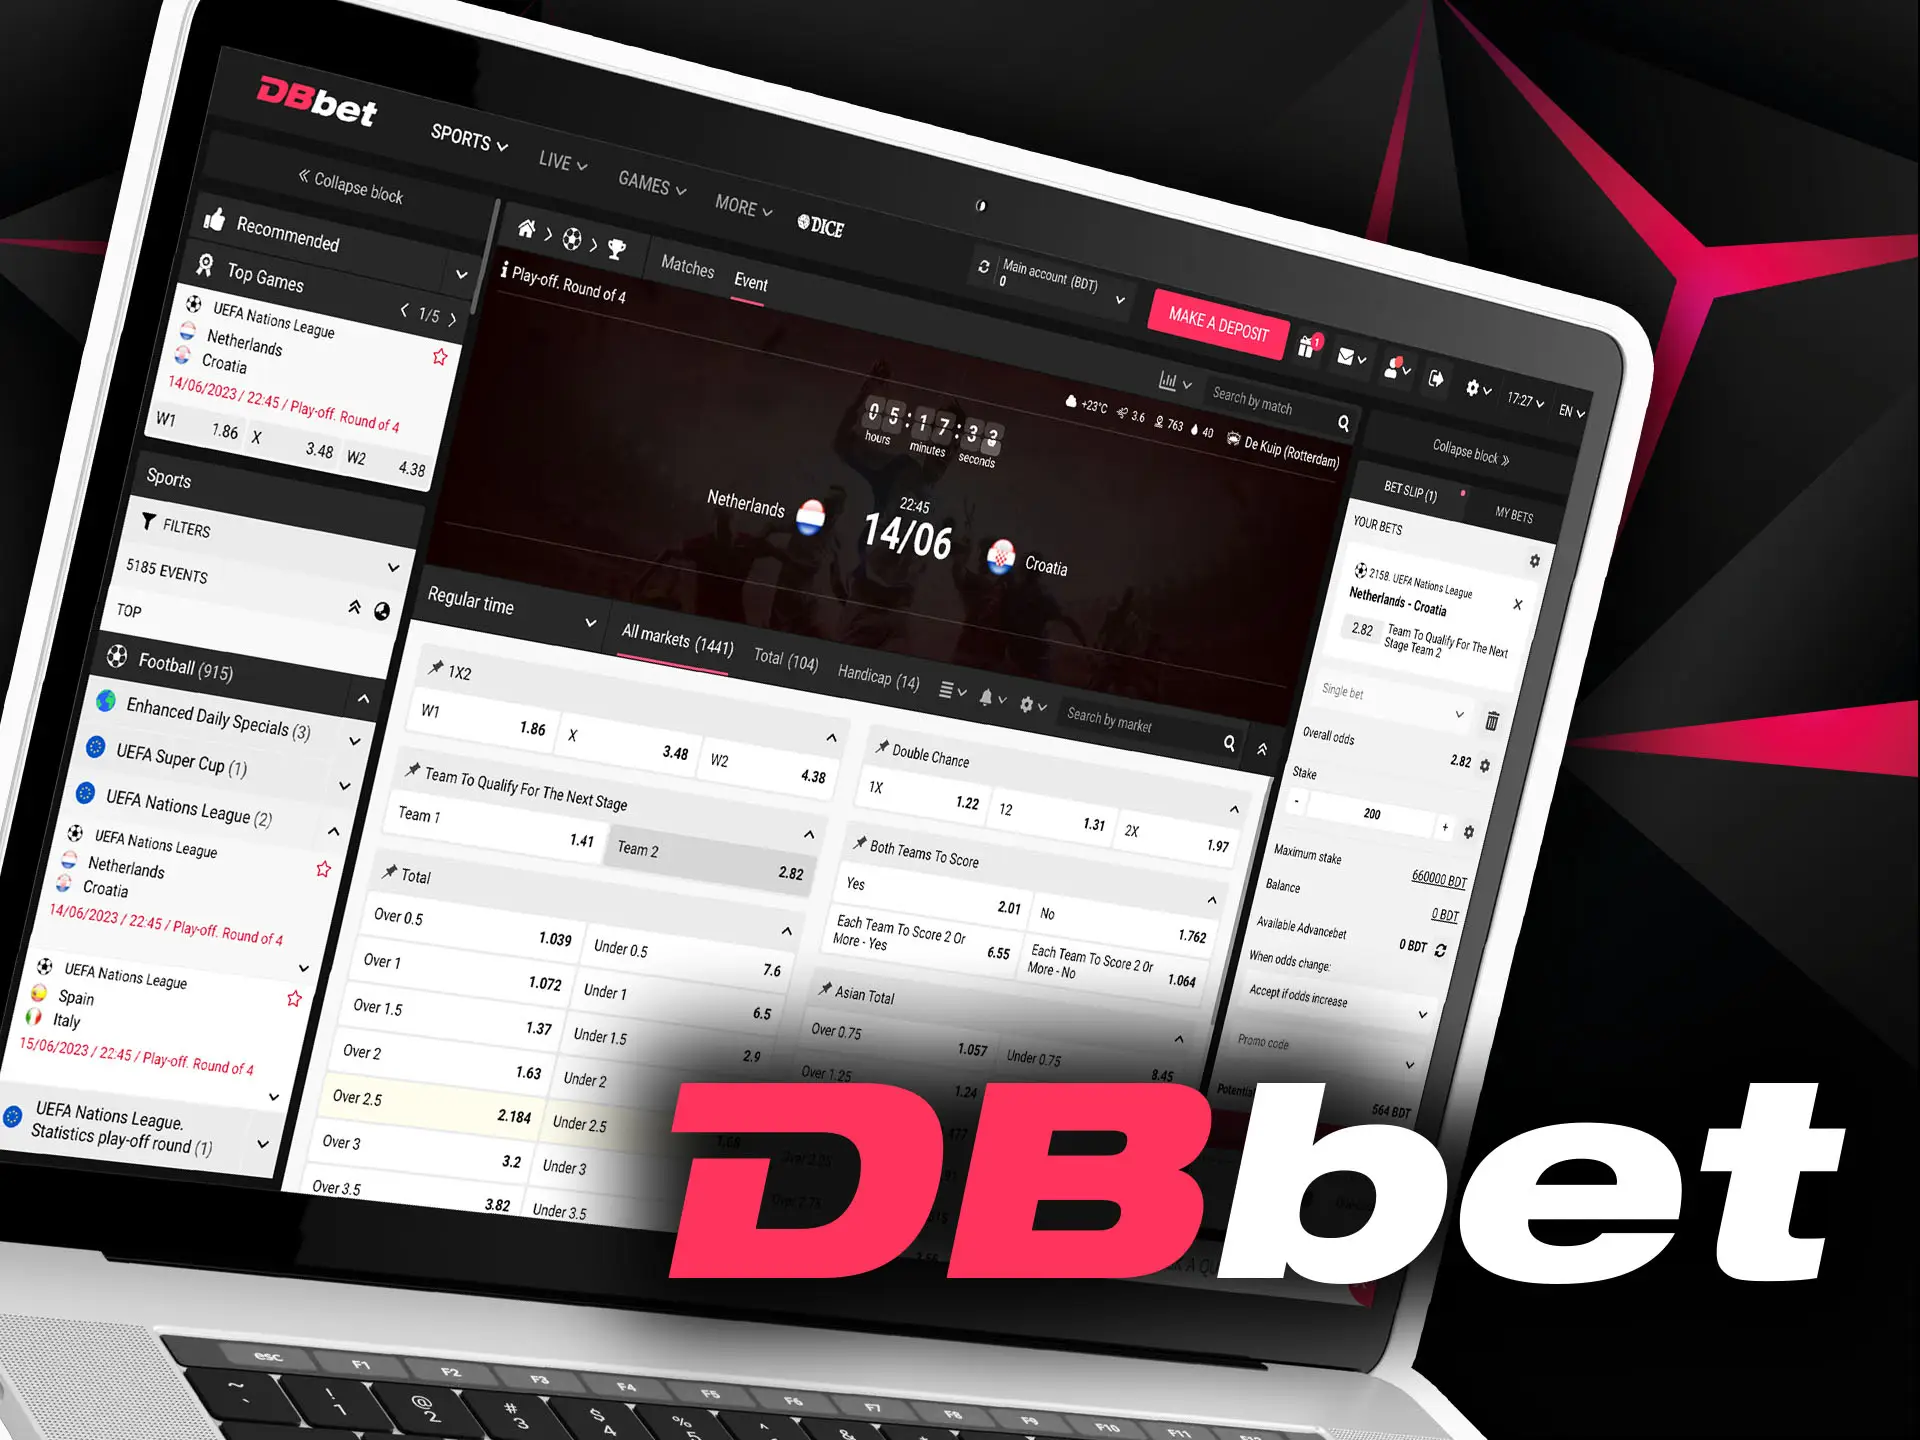 Sign up for DBbet, top up the account and place a bet.